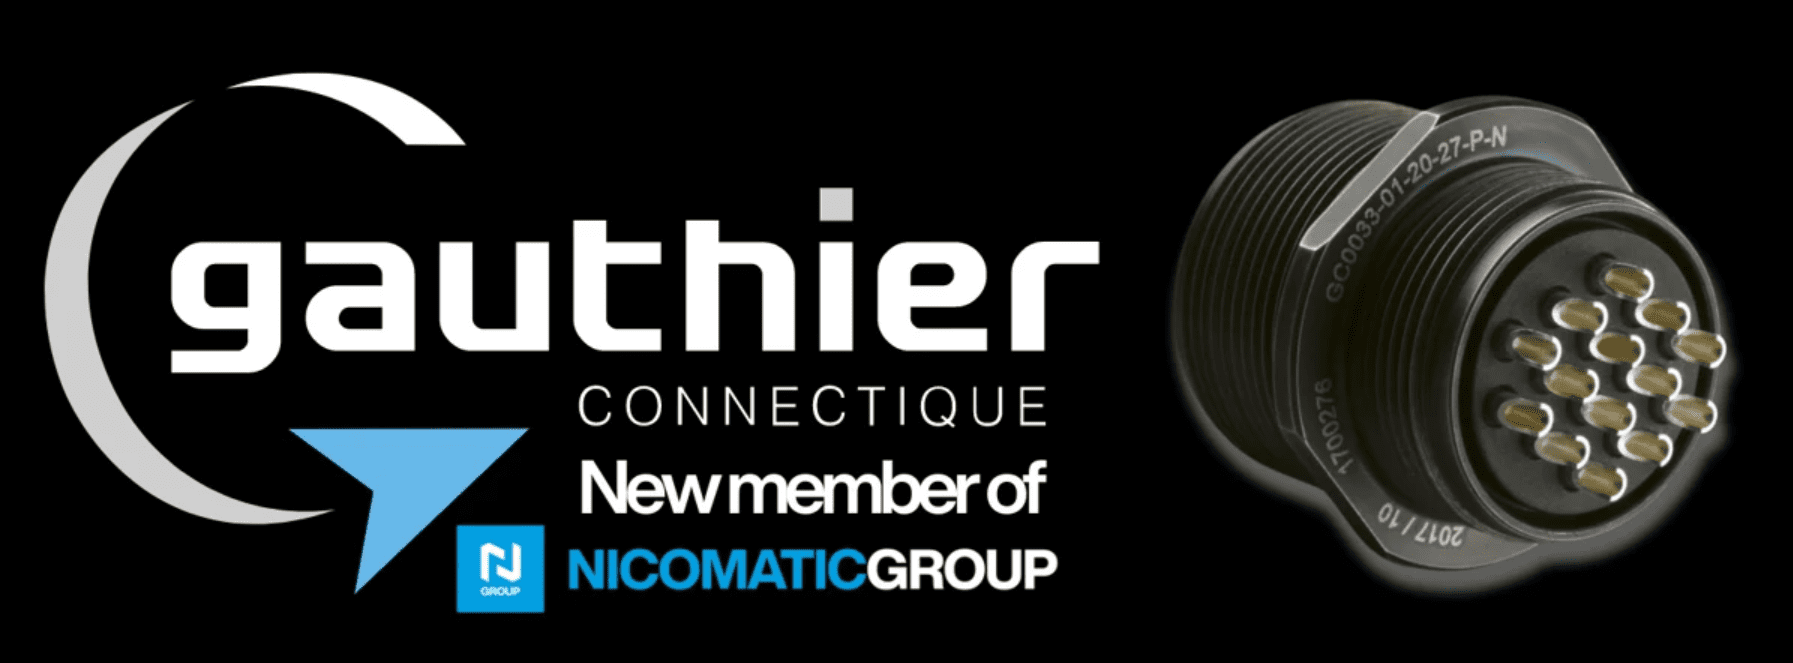 Nicomatic Group has acquired Gauthier Connectique, a specialist in precision connectors for the aerospace industry.